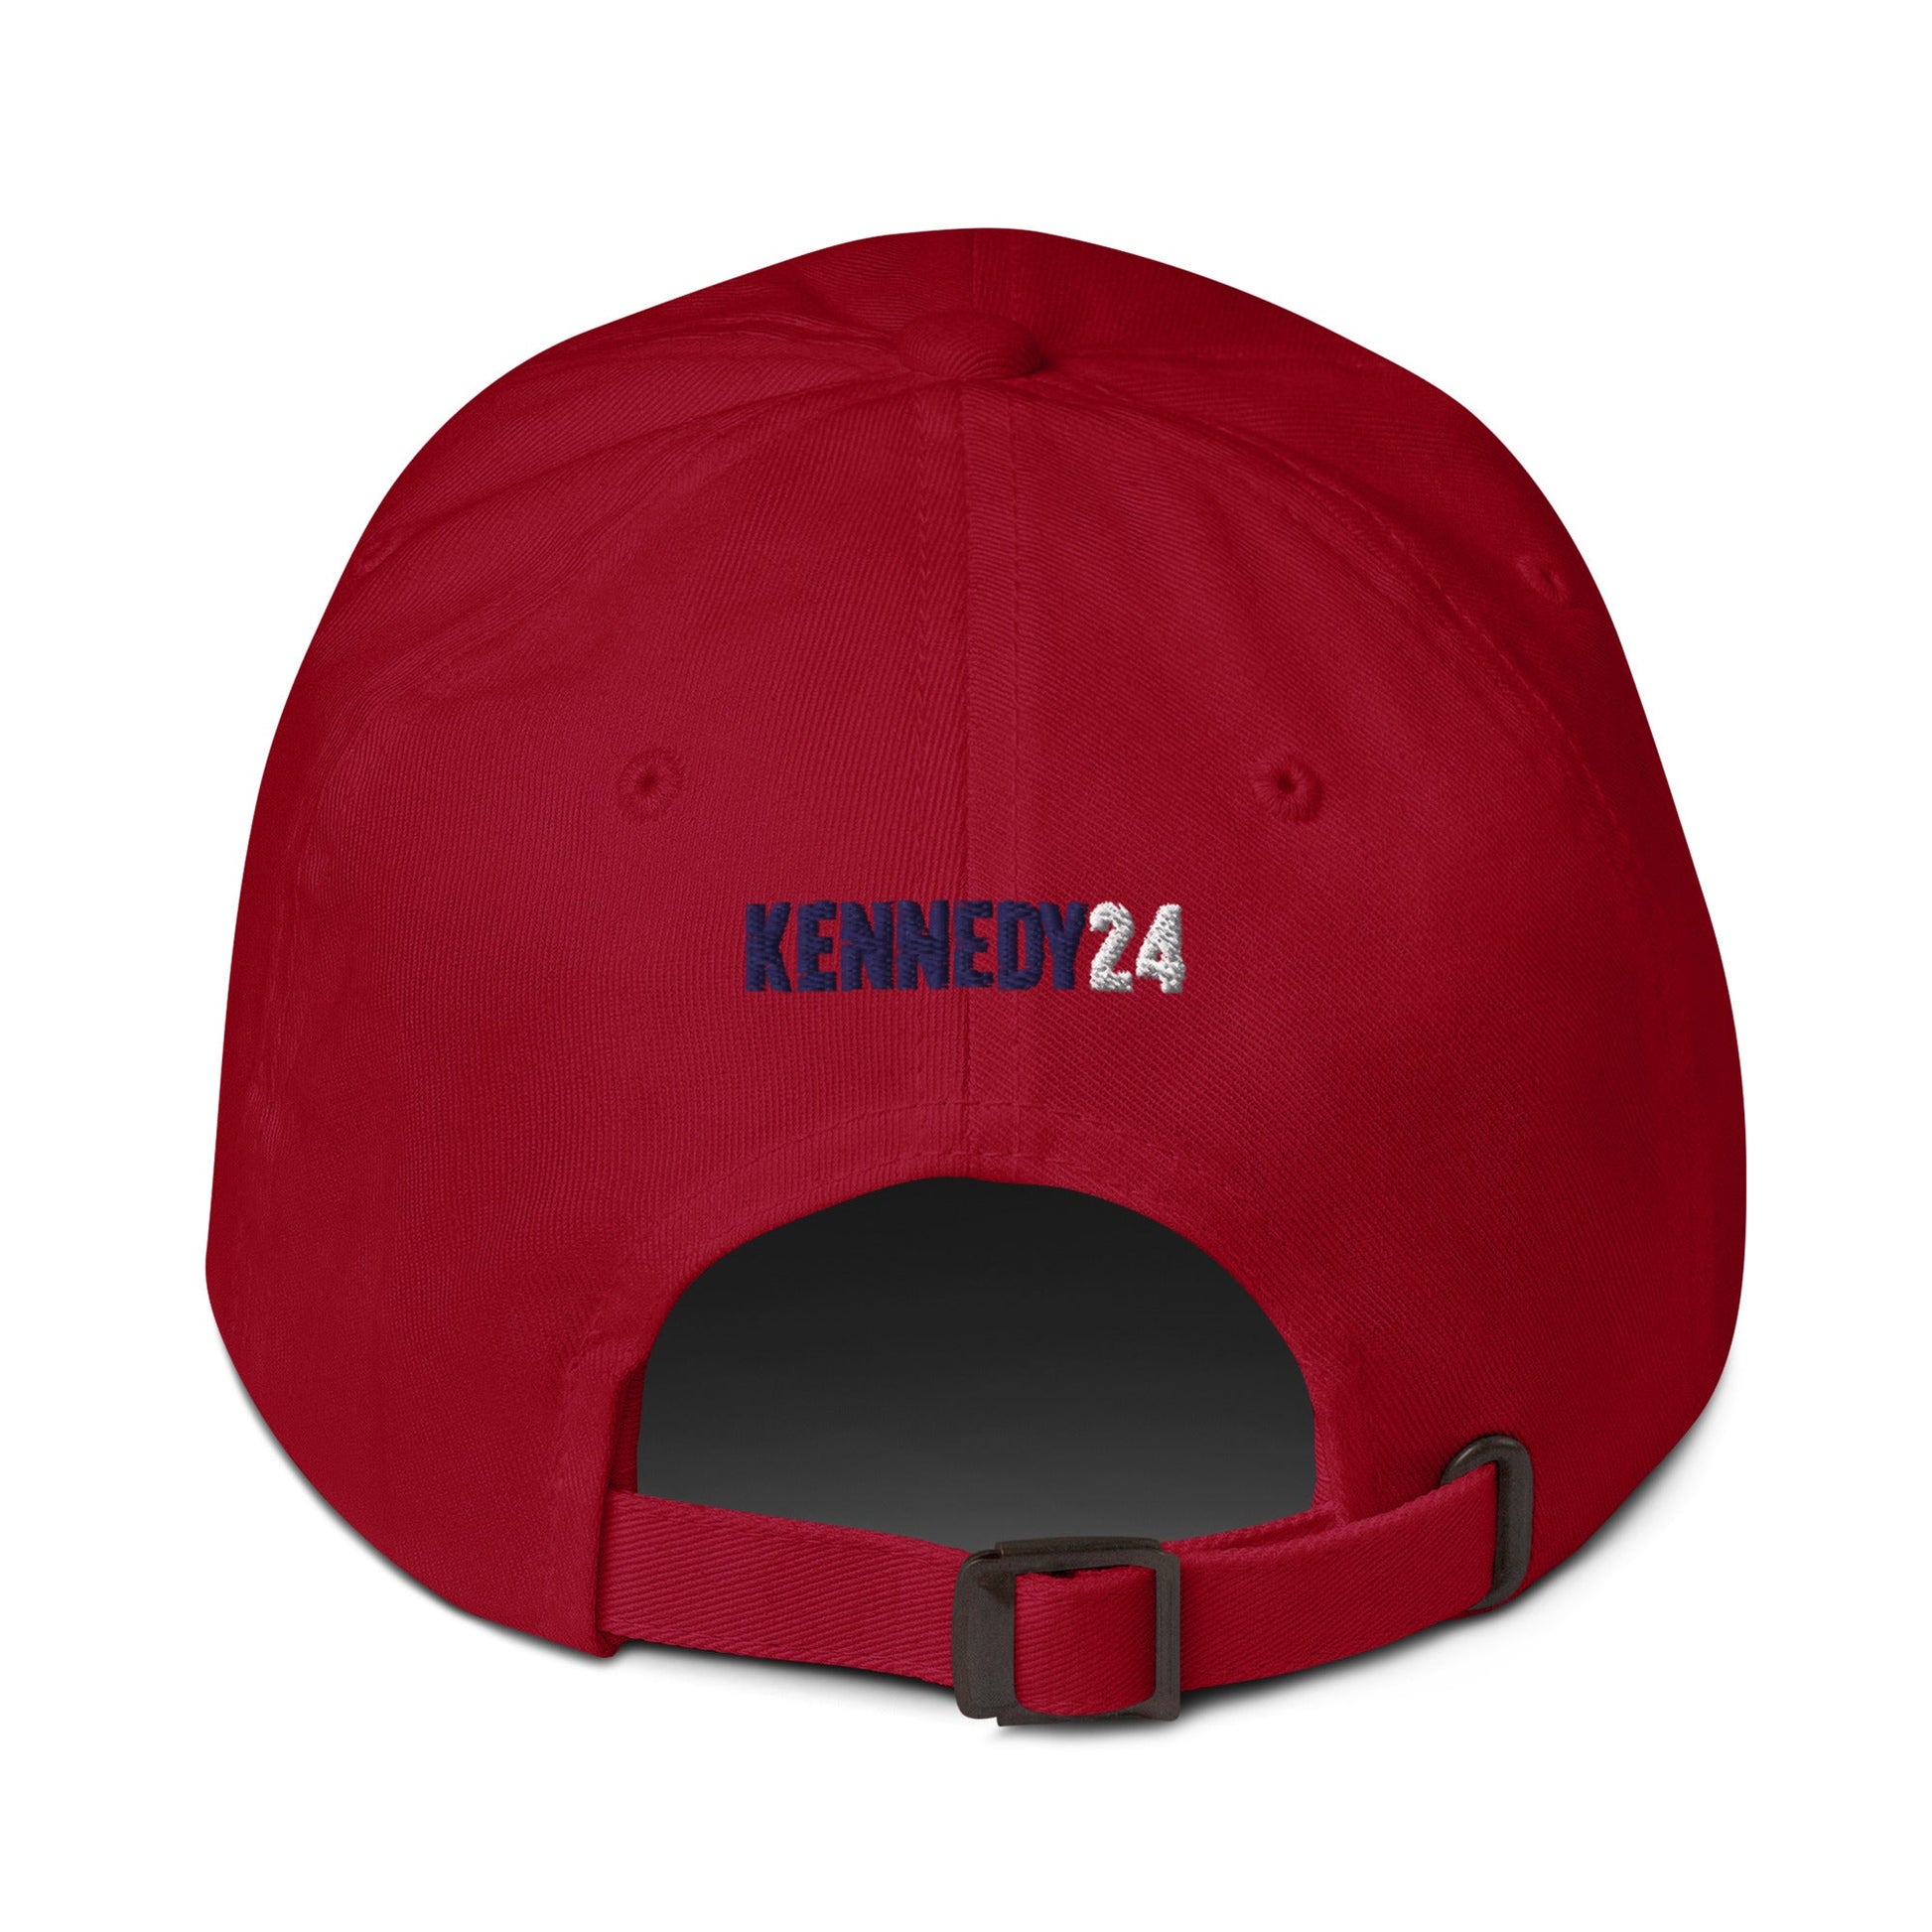 Navy for Kennedy Embroidered Dad Hat - TEAM KENNEDY. All rights reserved